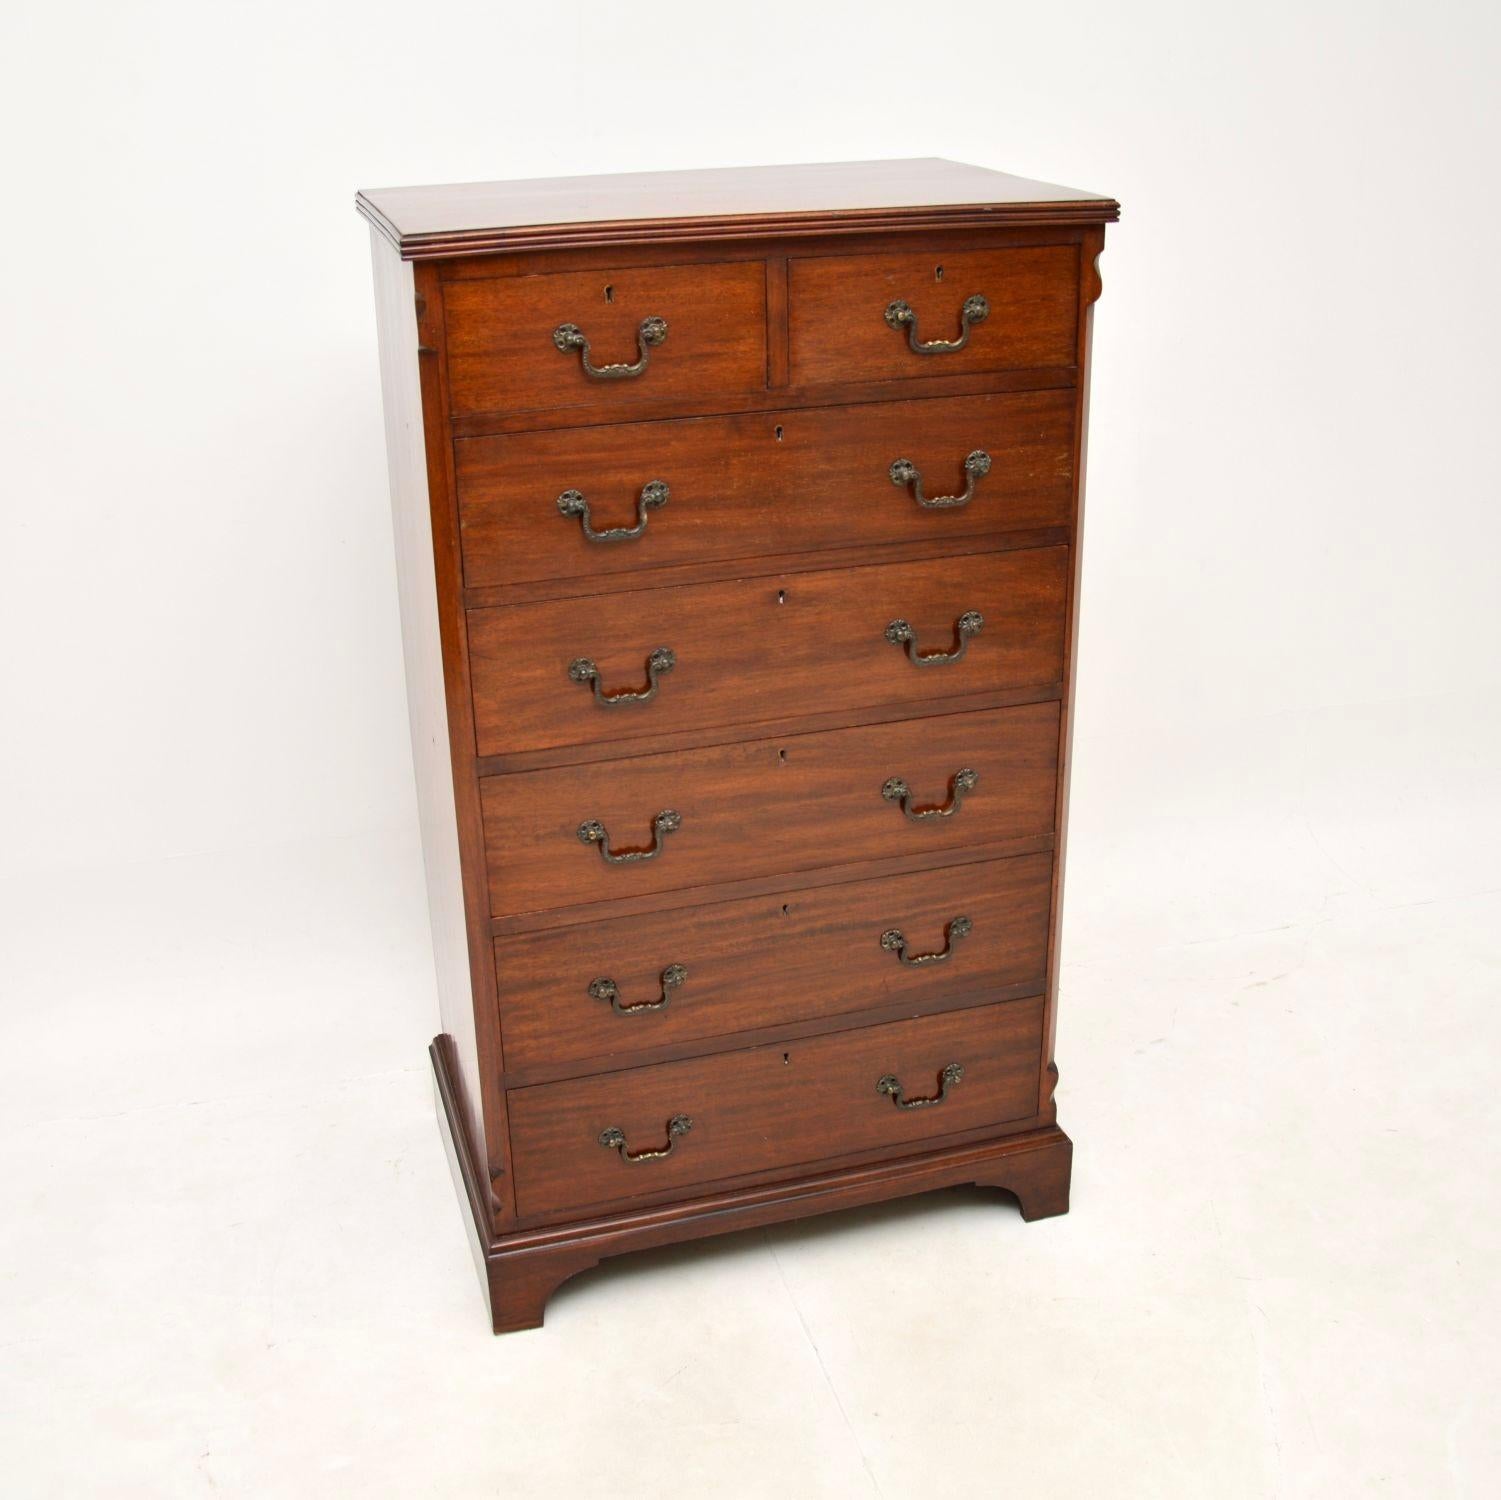 A large and impressive antique chest of drawers. This was made in England, it dates from around the 1900-1910 period.

It is of superb quality, this sits on bracket feet, has canted front edges and a grooved edges. The generous drawers have